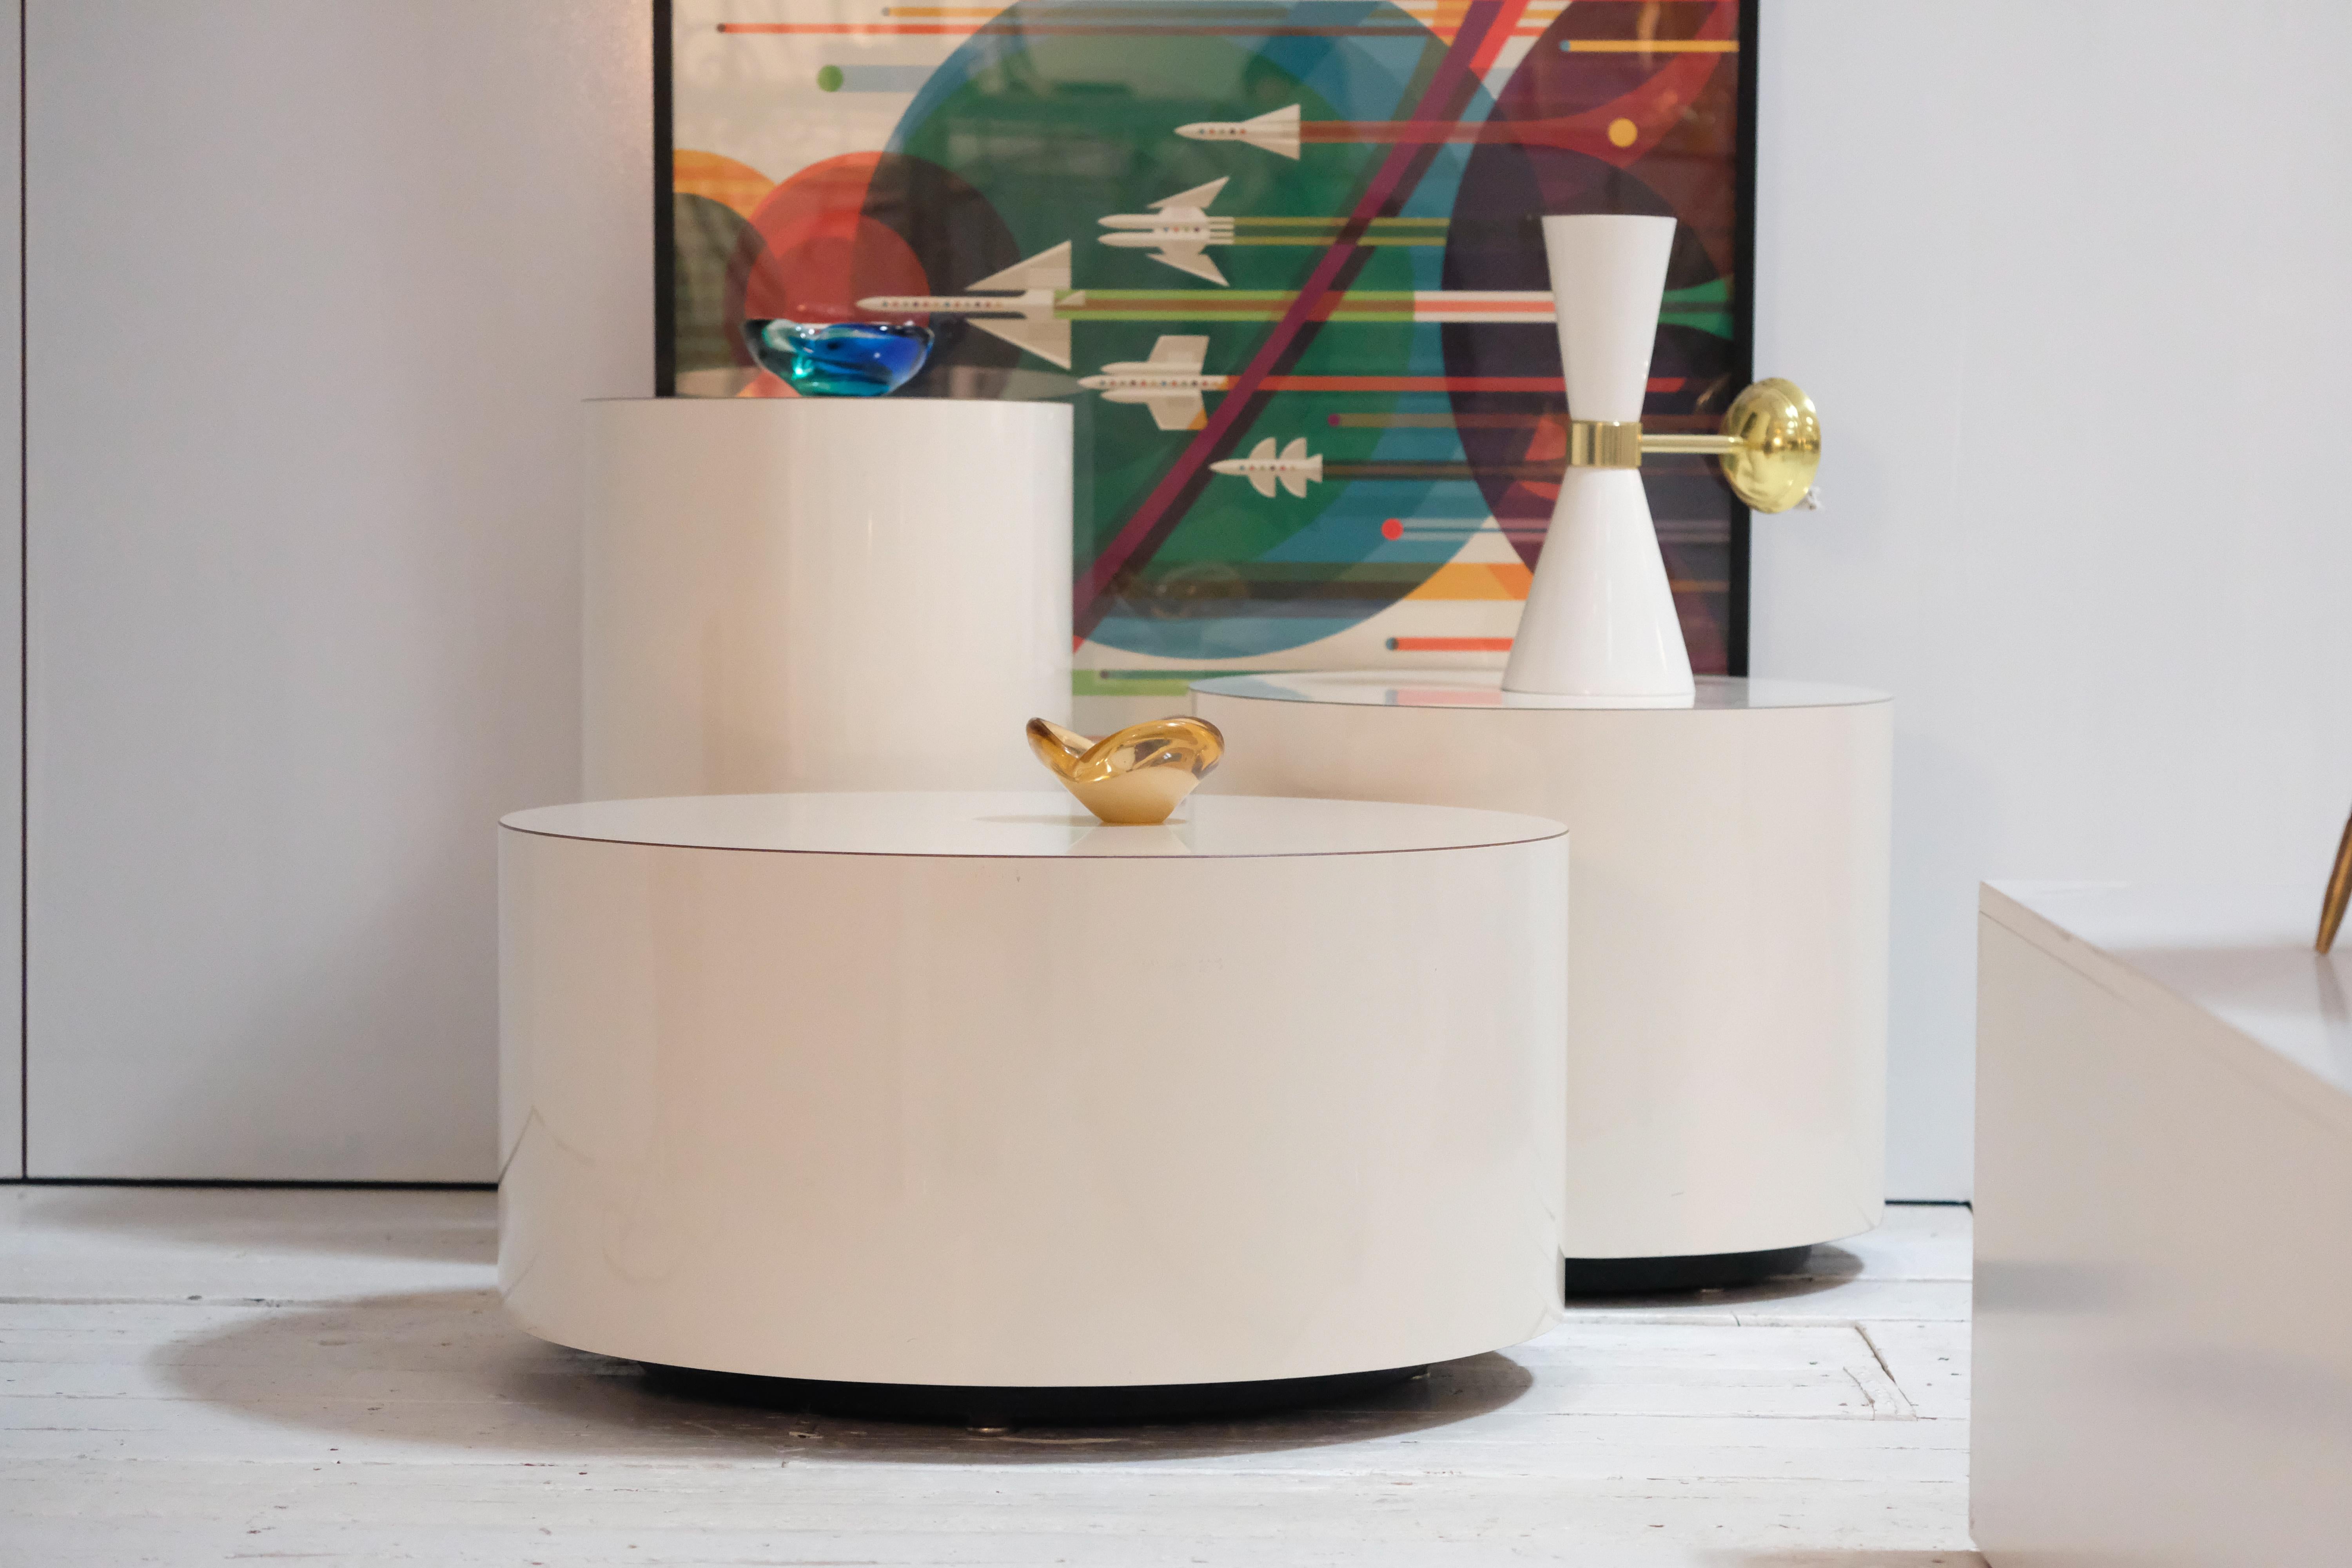 Luna High Gloss Laminate Collection - Coffee table / Side Tables / Auxiliary Tables

Luna Table Set in High Gloss Laminate is a stunning collection of moon-inspired tables, meticulously handcrafted in Spain from your choice of satin brass or